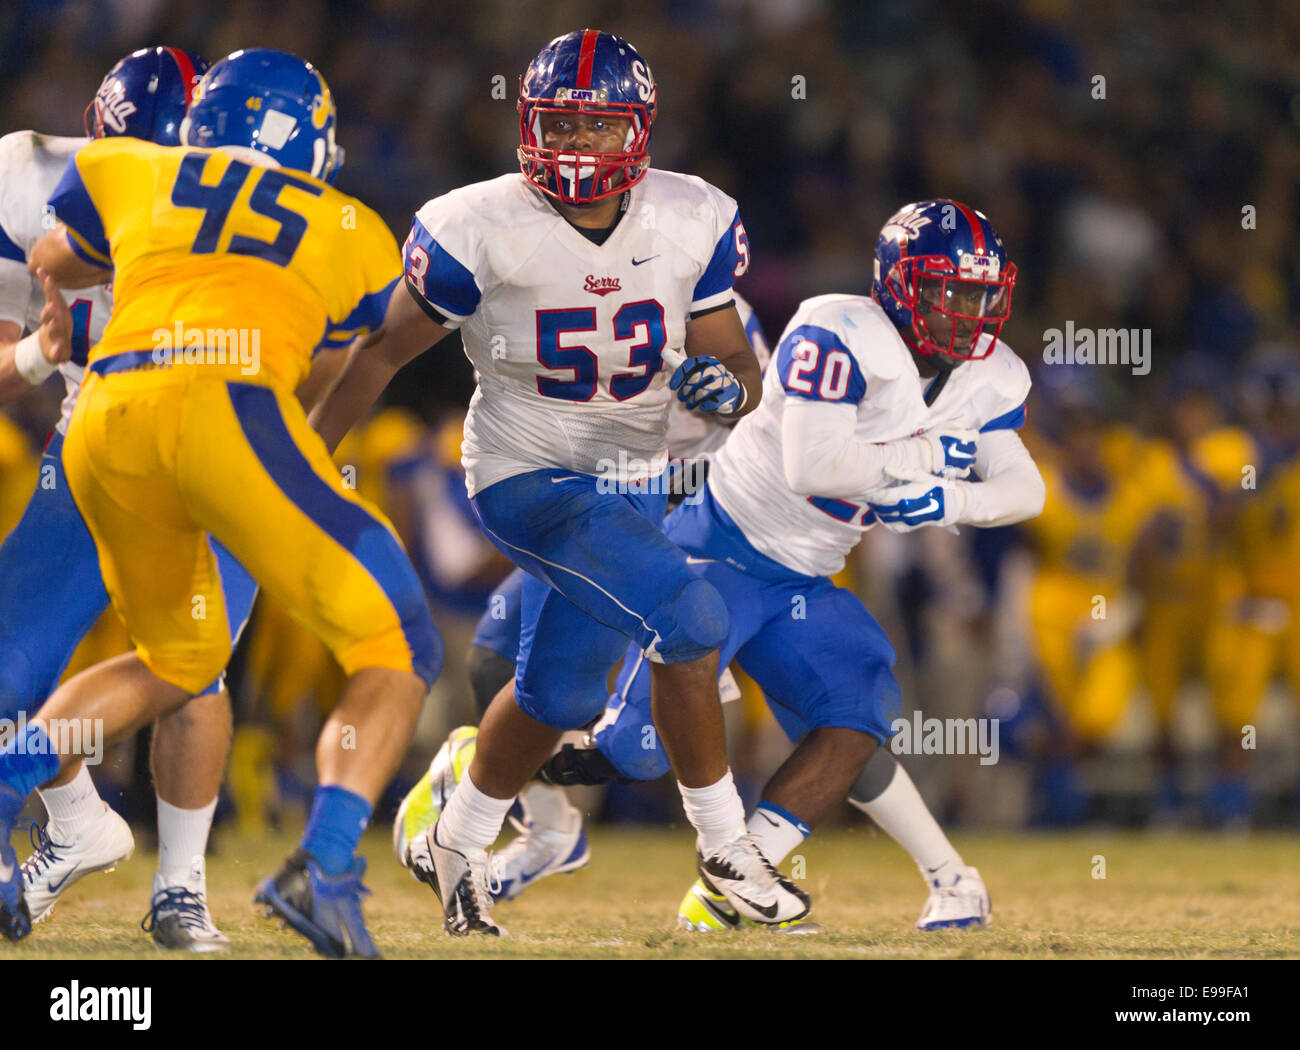 October 4, 2014, La Puente, CA.Gardena Serra cavaliers offenisve line (53) Steven Winn in action during the Bishop Amat upset of the Cavaliers at Bishop Amat high school on October 3, 2014. The Cavaliers who are usually a nationally ranked high school football team, were upset by Bishop Amat 14 - 7. (Mandatory Credit: Ed Ruvalcaba/MarinMedia.org/Cal Sport Media) (Complete photographer, and company credit required) Stock Photo